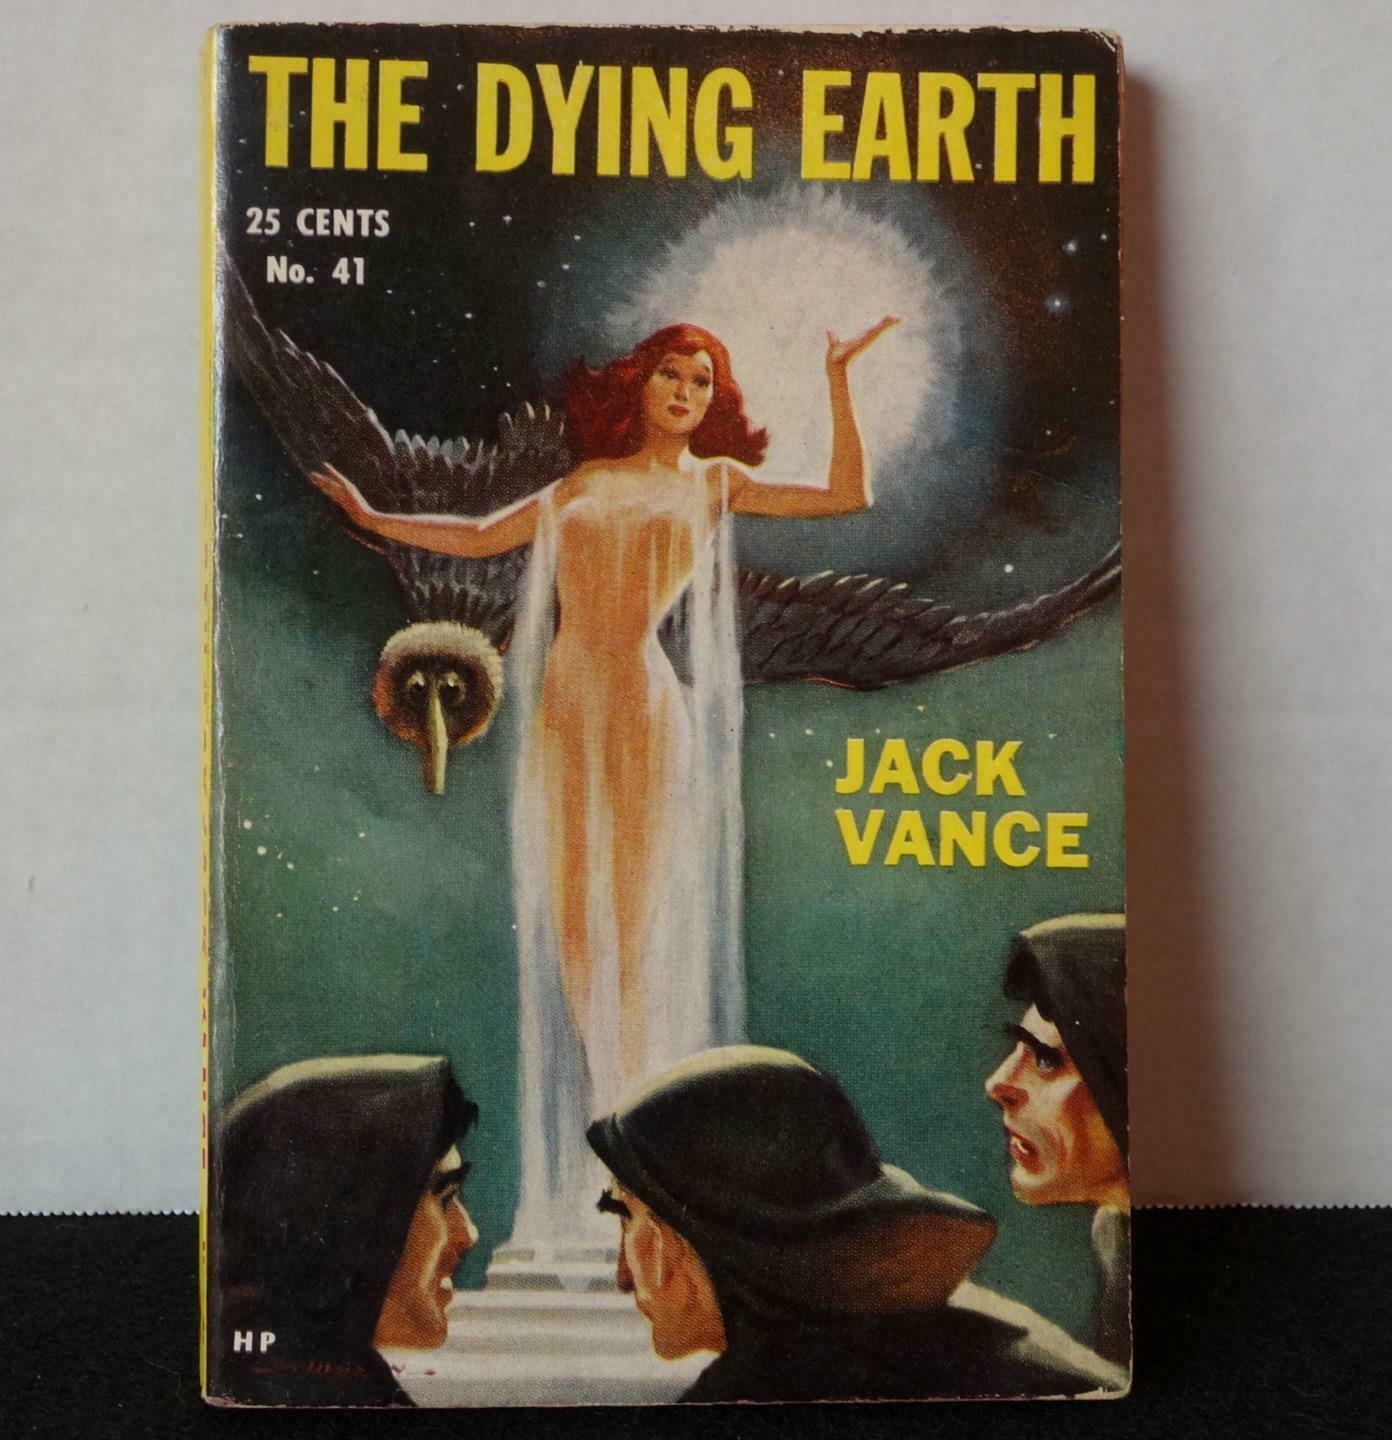 cover image of the 1950 edition of The dying earth published by Hillmann Periodicals